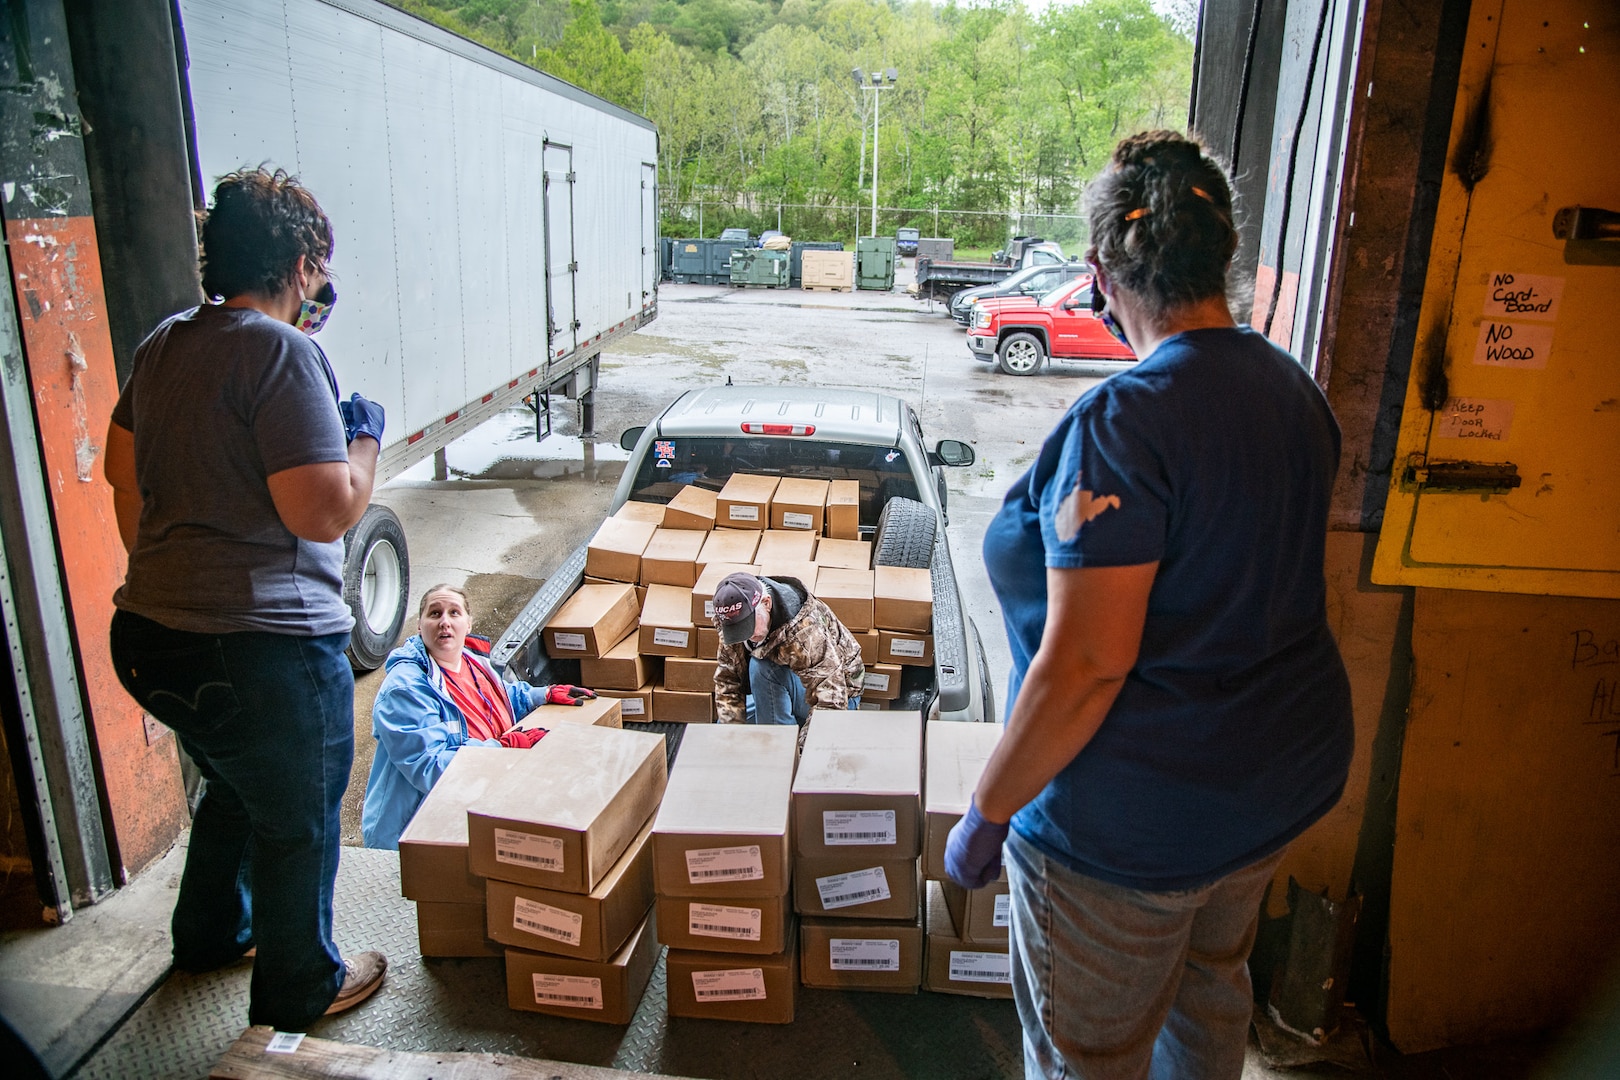 Employees and volunteers with the Mountaineer Food Bank help distribute supplies to volunteers with a local food bank from a newly created food distribution center at the West Virginia National Guard's Rock Branch facility in Poca, West Virignia, May 05, 2020. The new center is a joint effort between the West Virginia National Guard (WVNG), West Virginia Voluntary Organizations Active in Disasters (VOAD), Mountaineer Food Bank, Facing Hunger Food Bank, and the West Virginia Division of Homeland Security and Emergency Management (WVDHSEM) as the need for supplemental and emergency food services continues to grow across the Mountain State during the ongoing COVID-19 pandemic. (U.S. Army National Guard photo by Edwin L. Wriston)